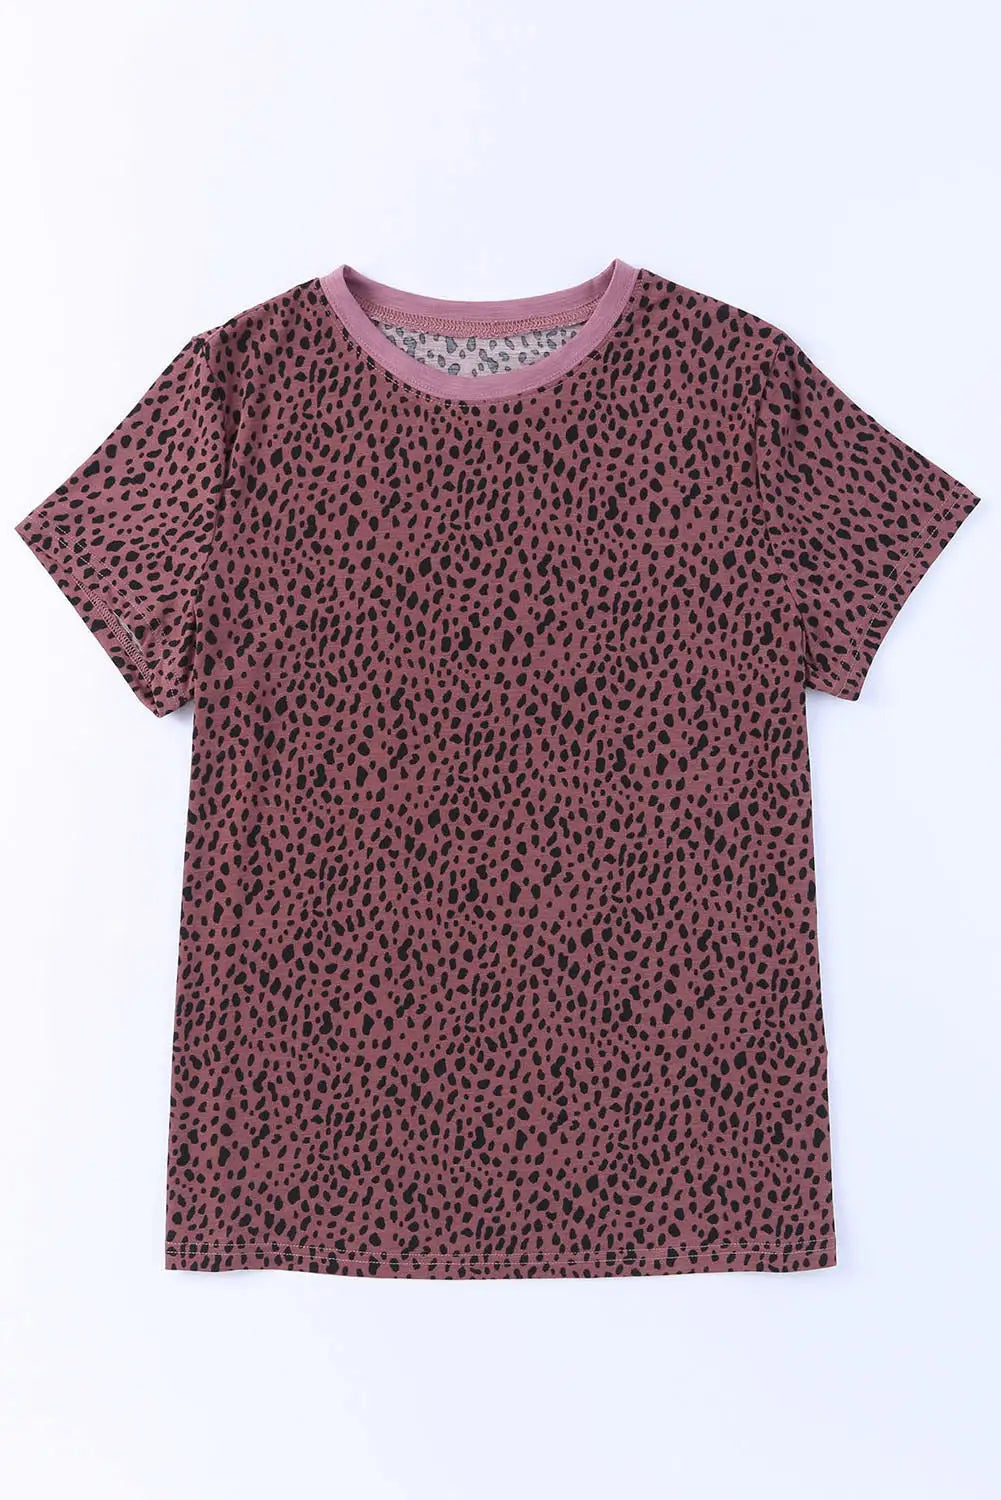 Animal Spotted Print Round Neck Long Sleeve Top-32